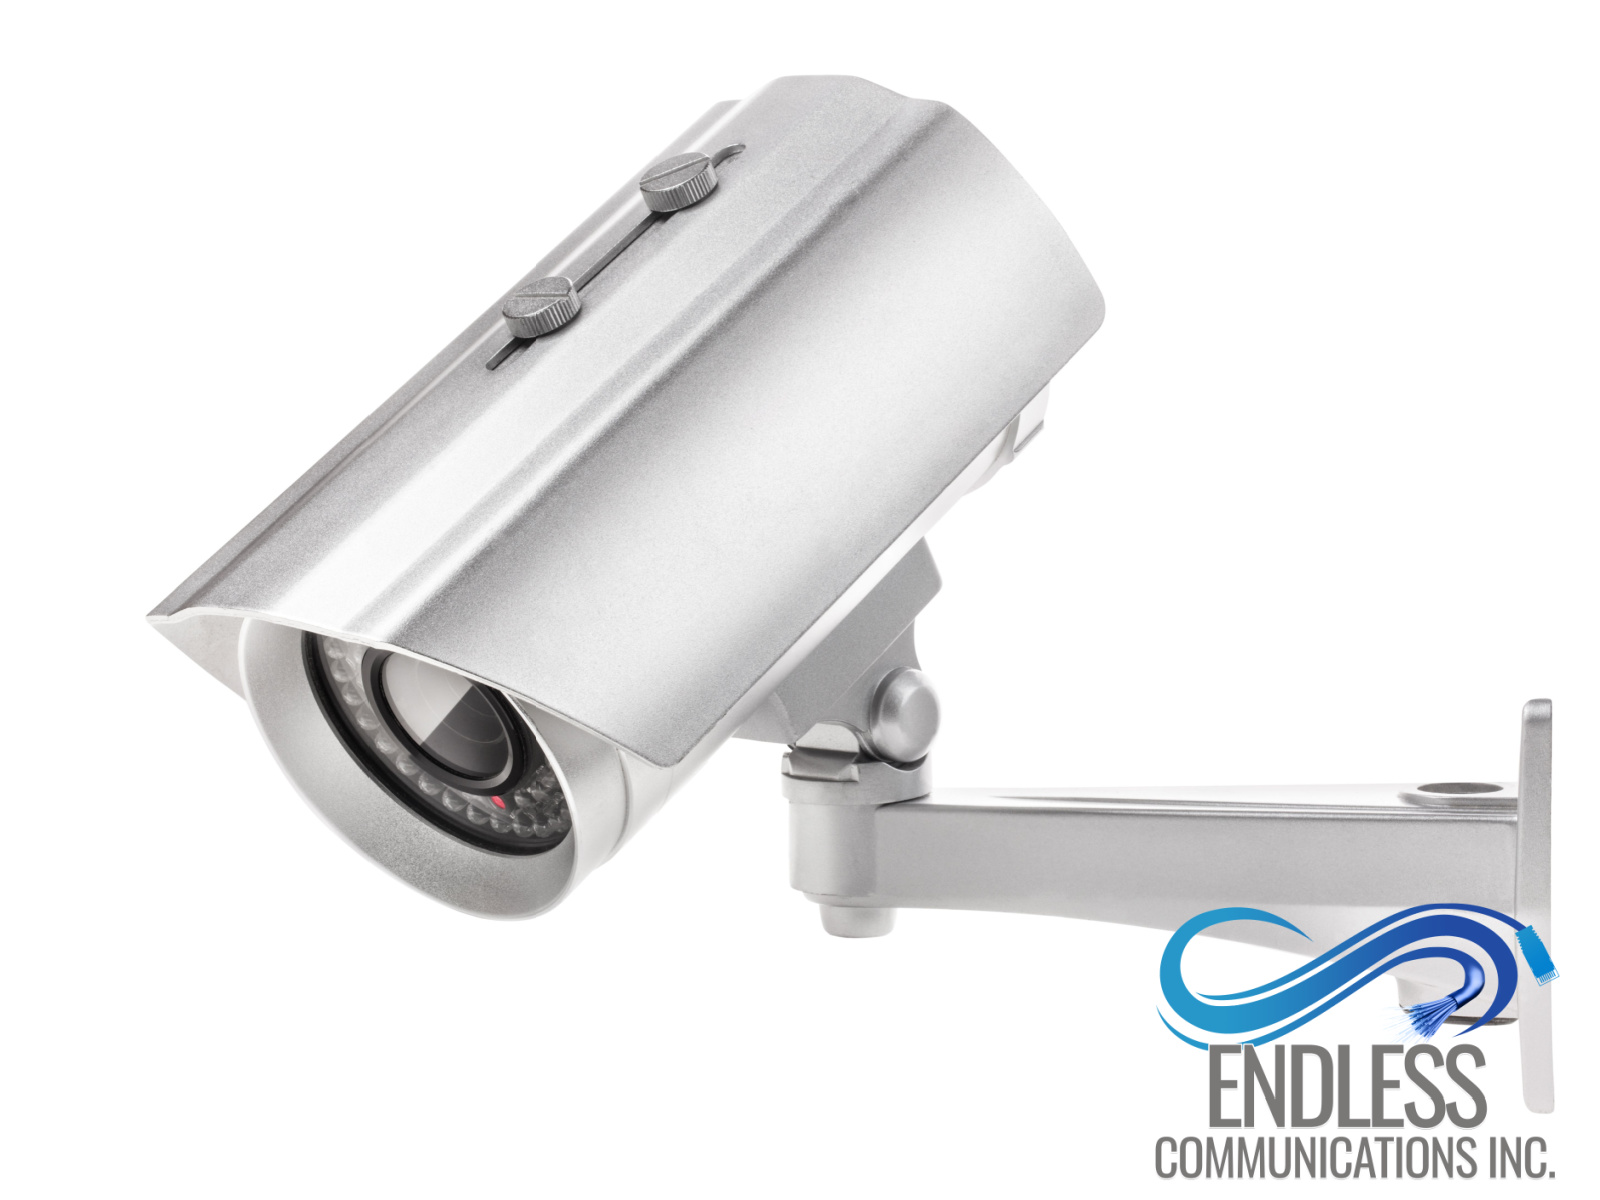 Keep Eyes on What Matters with Premier Security Camera Service